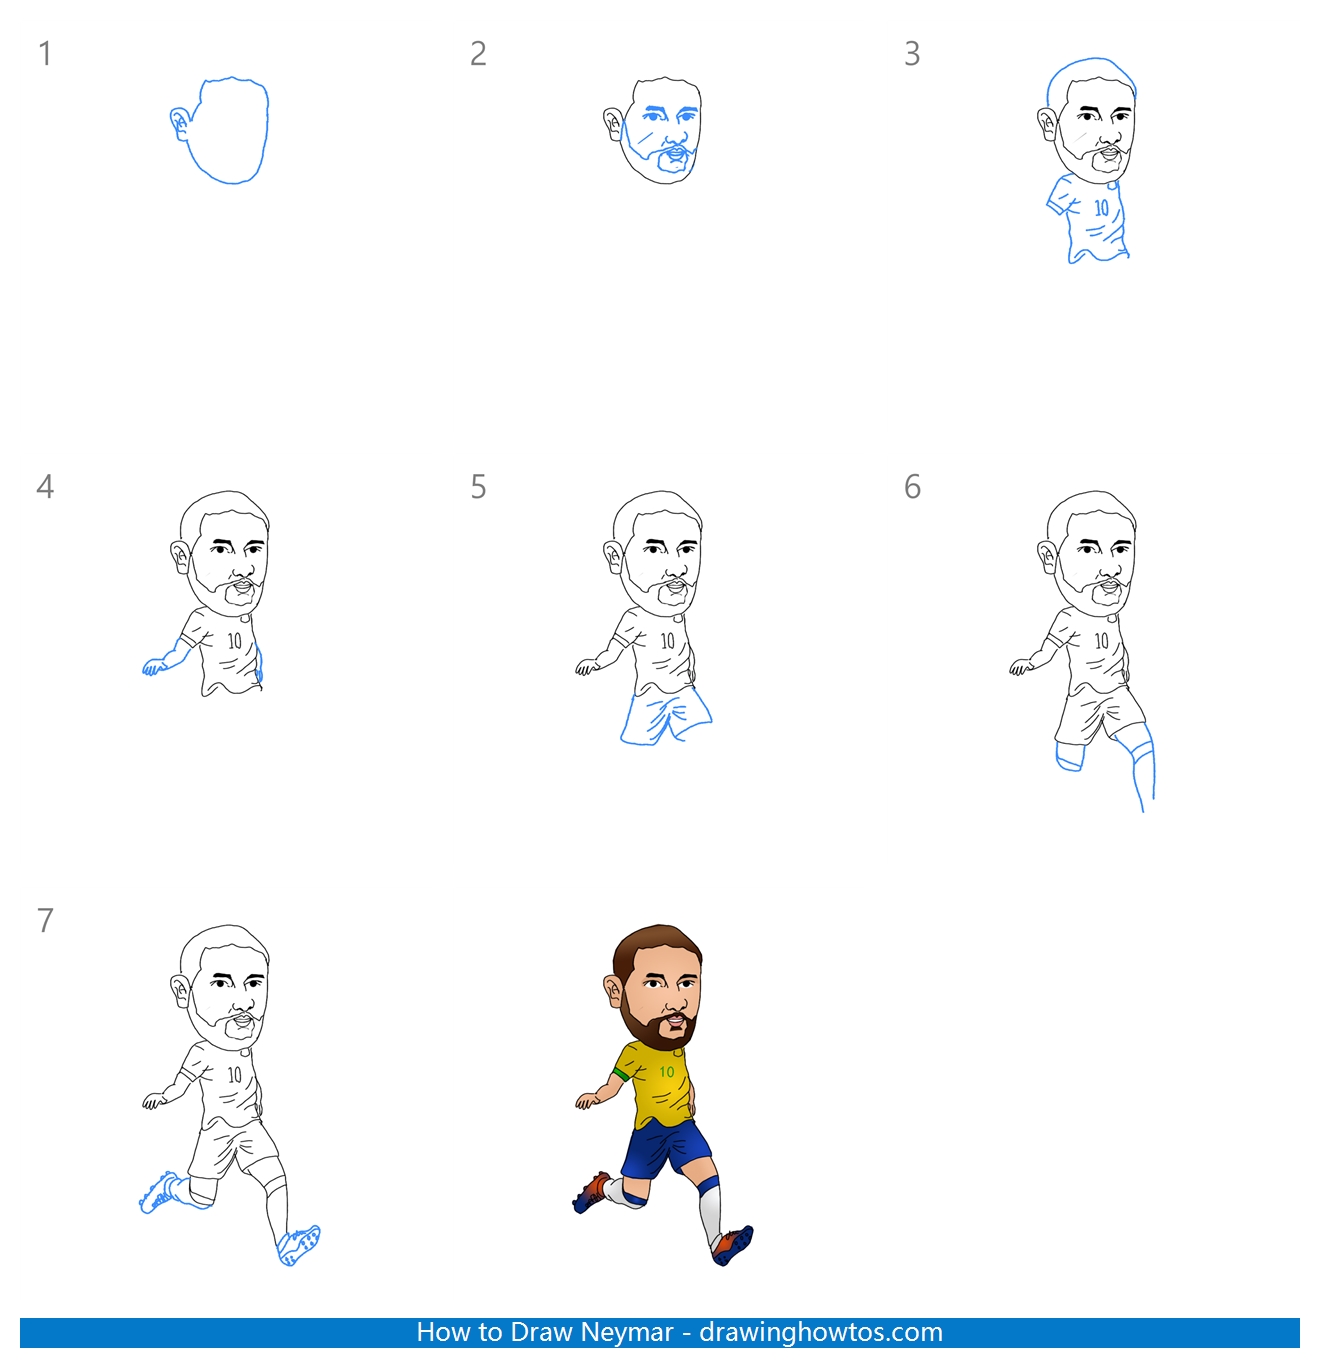 How to Draw Neymar - Step by Step Easy Drawing Guides - Drawing Howtos